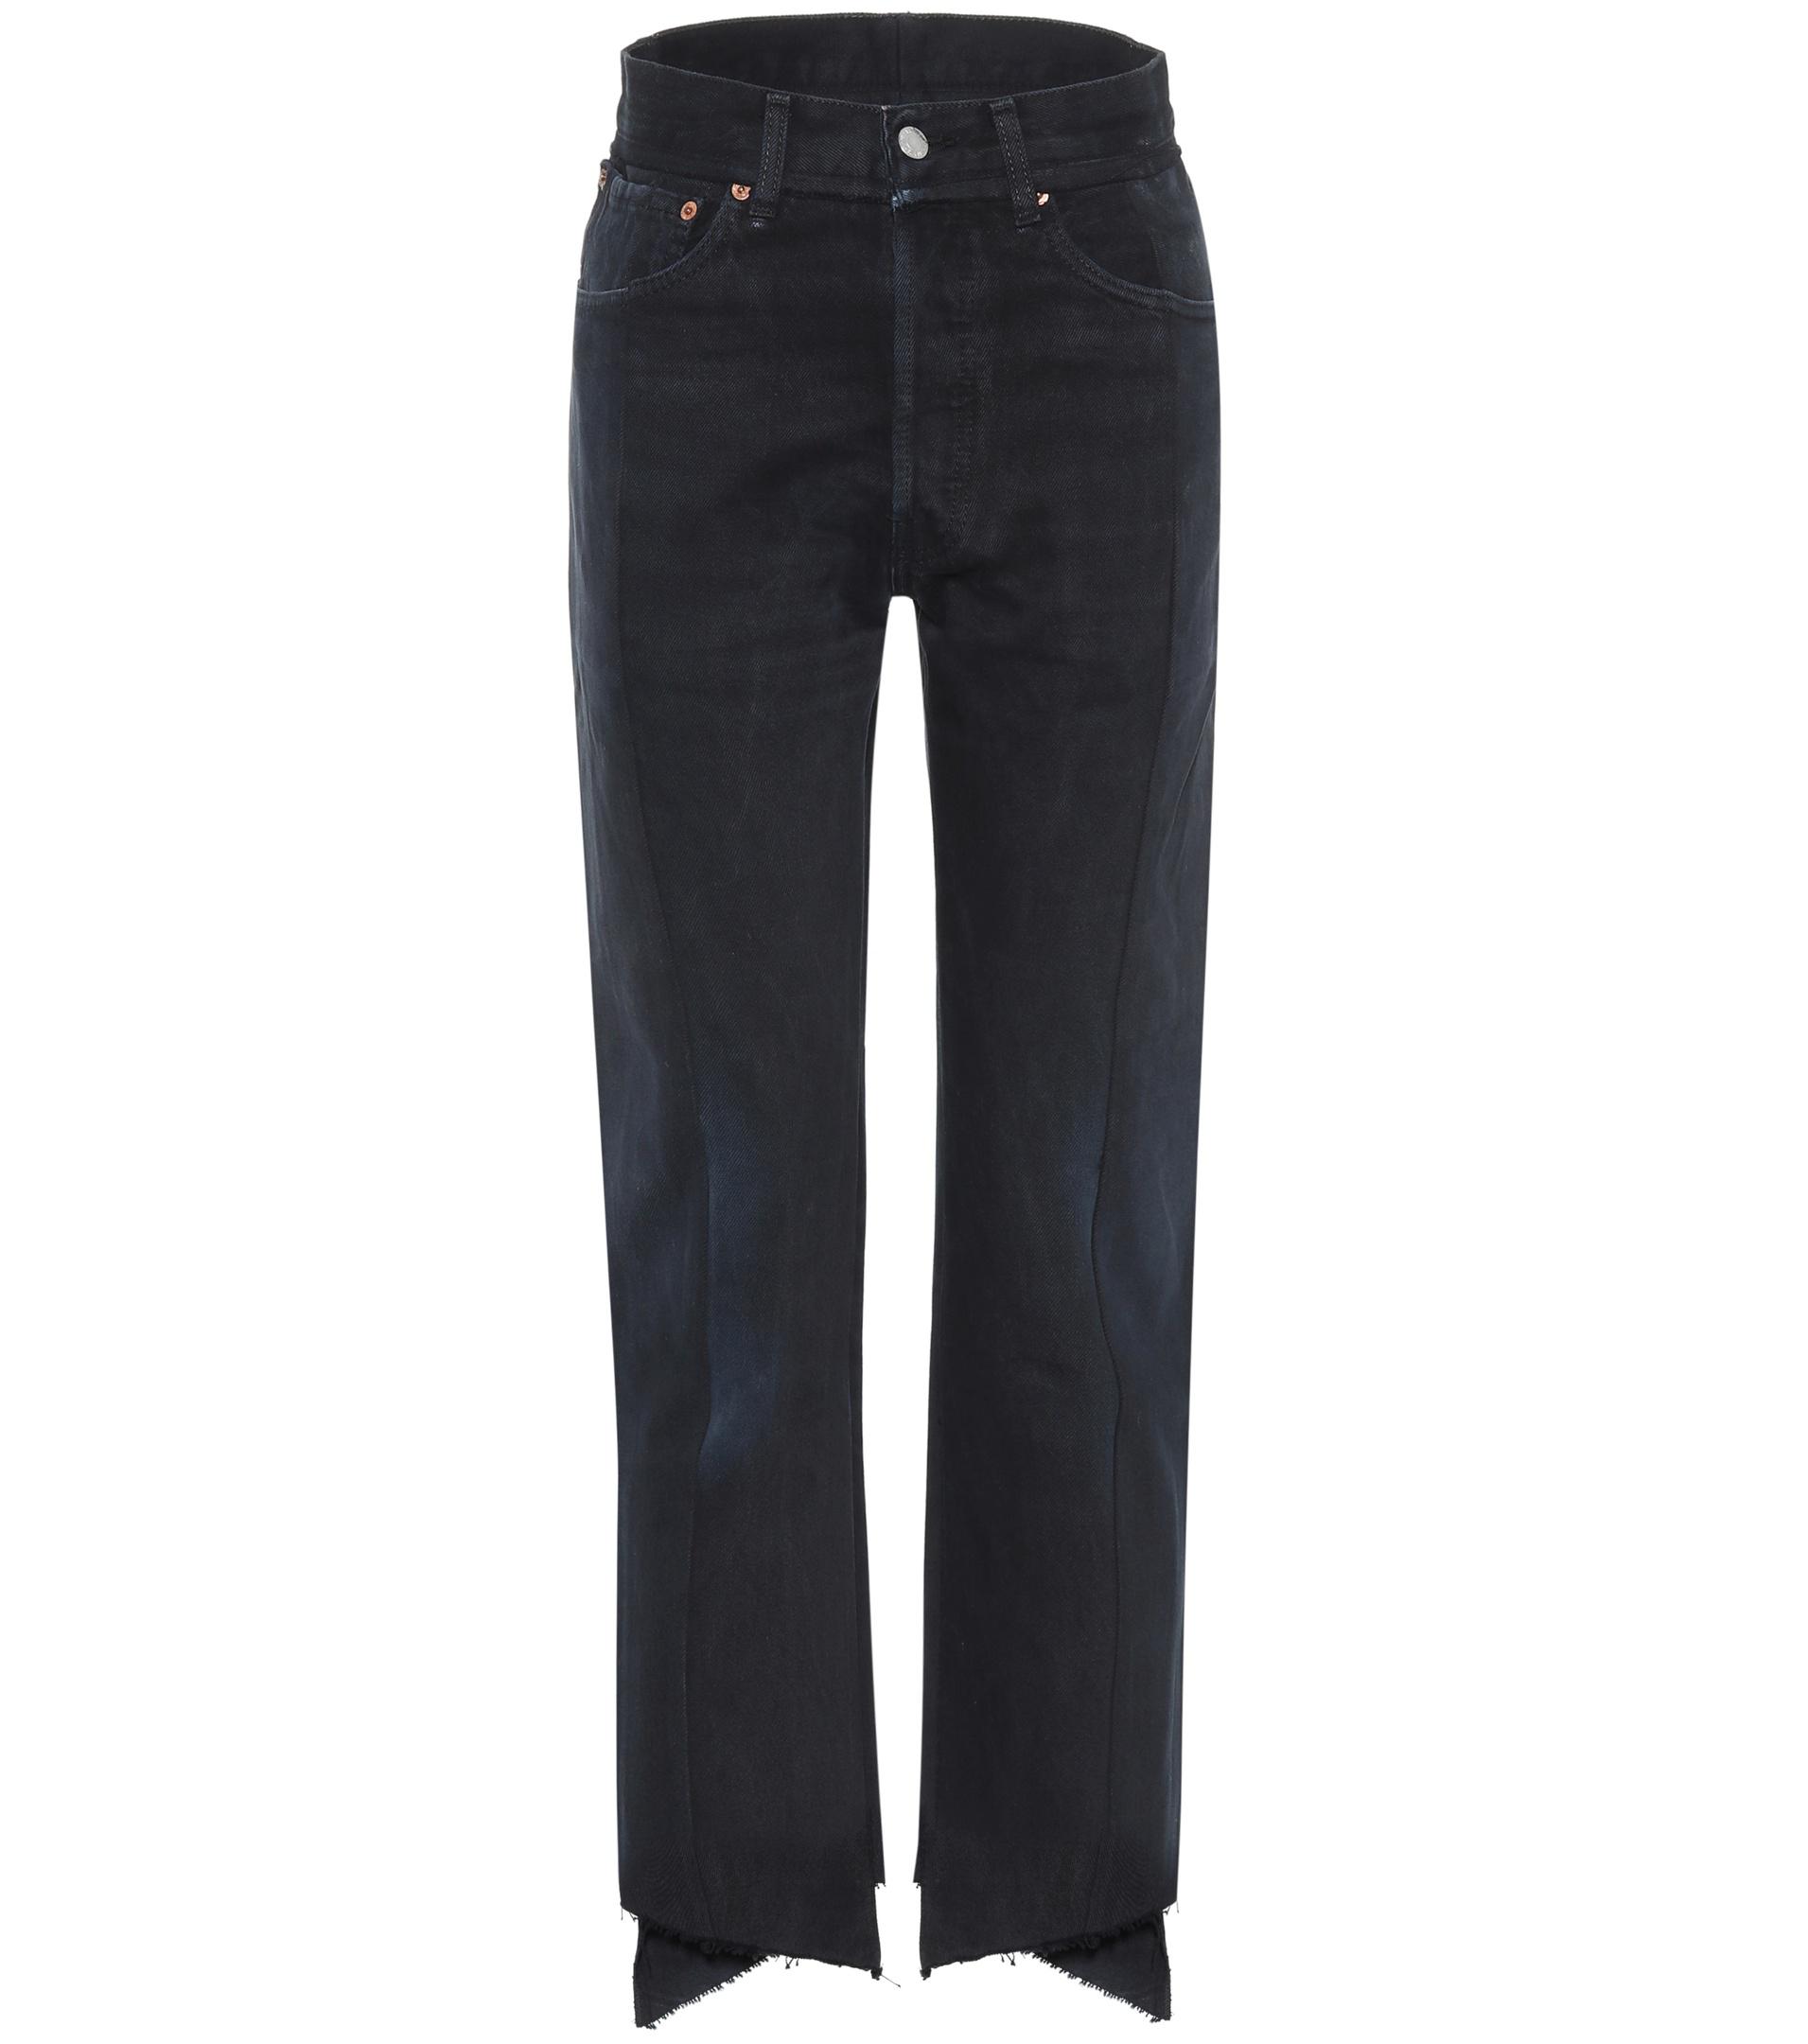 Vetements Denim High-waisted Deconstructed Jeans in Black - Lyst